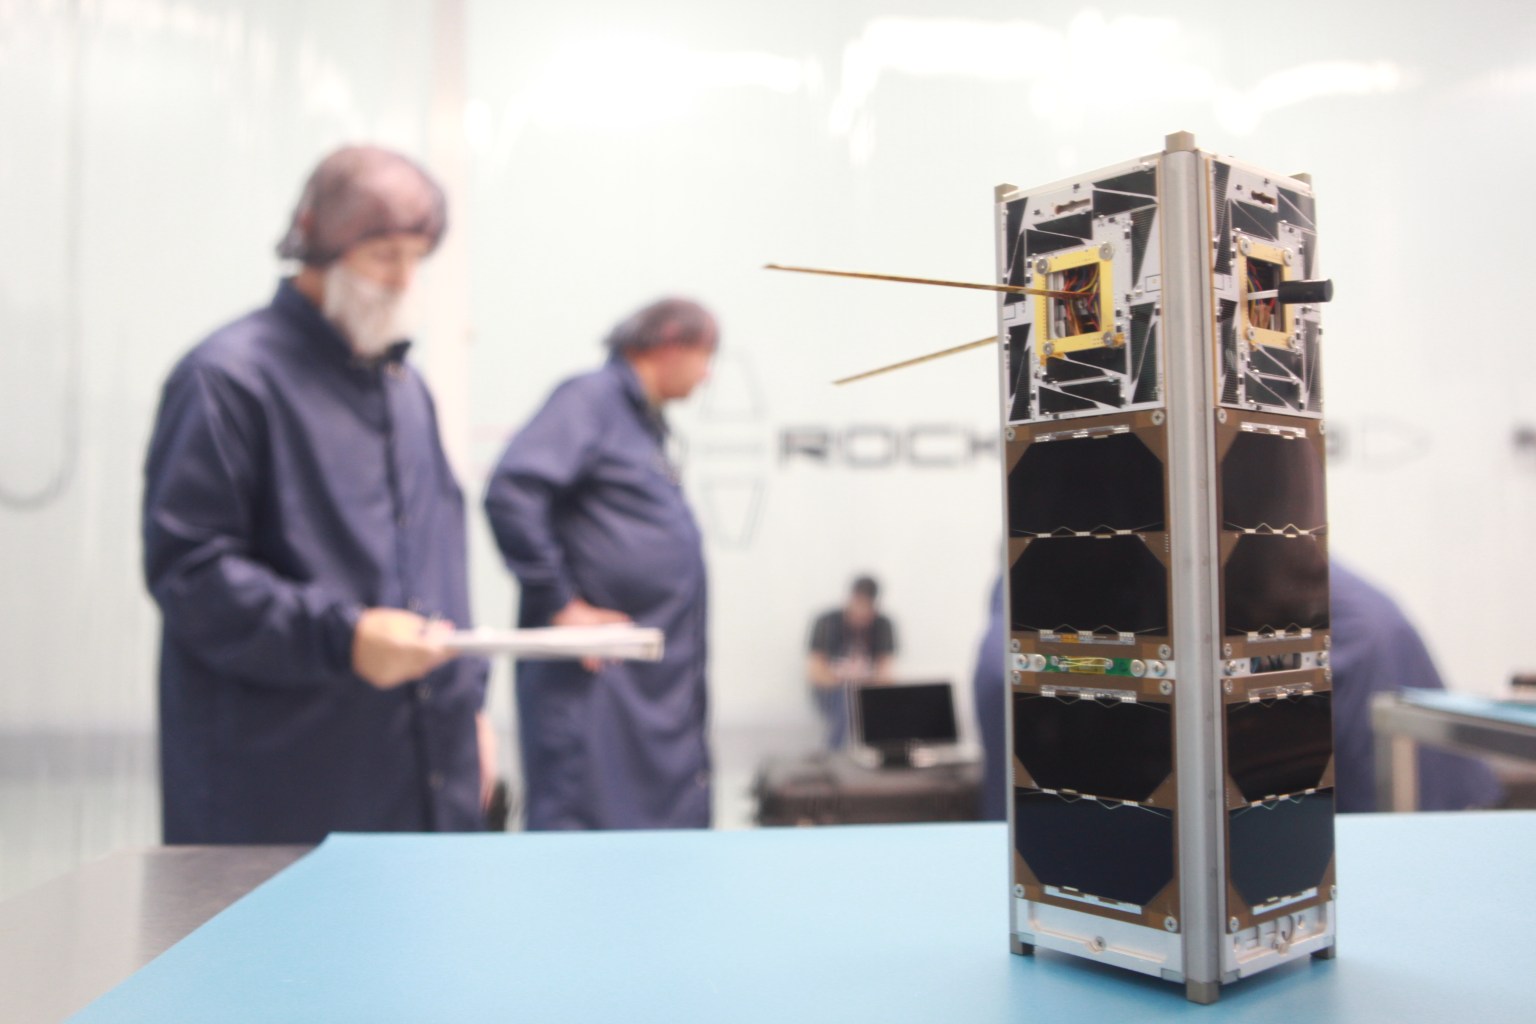 The goal of the CHOMPTT mission is to demonstrate new technologies for navigation and satellite networking in space.